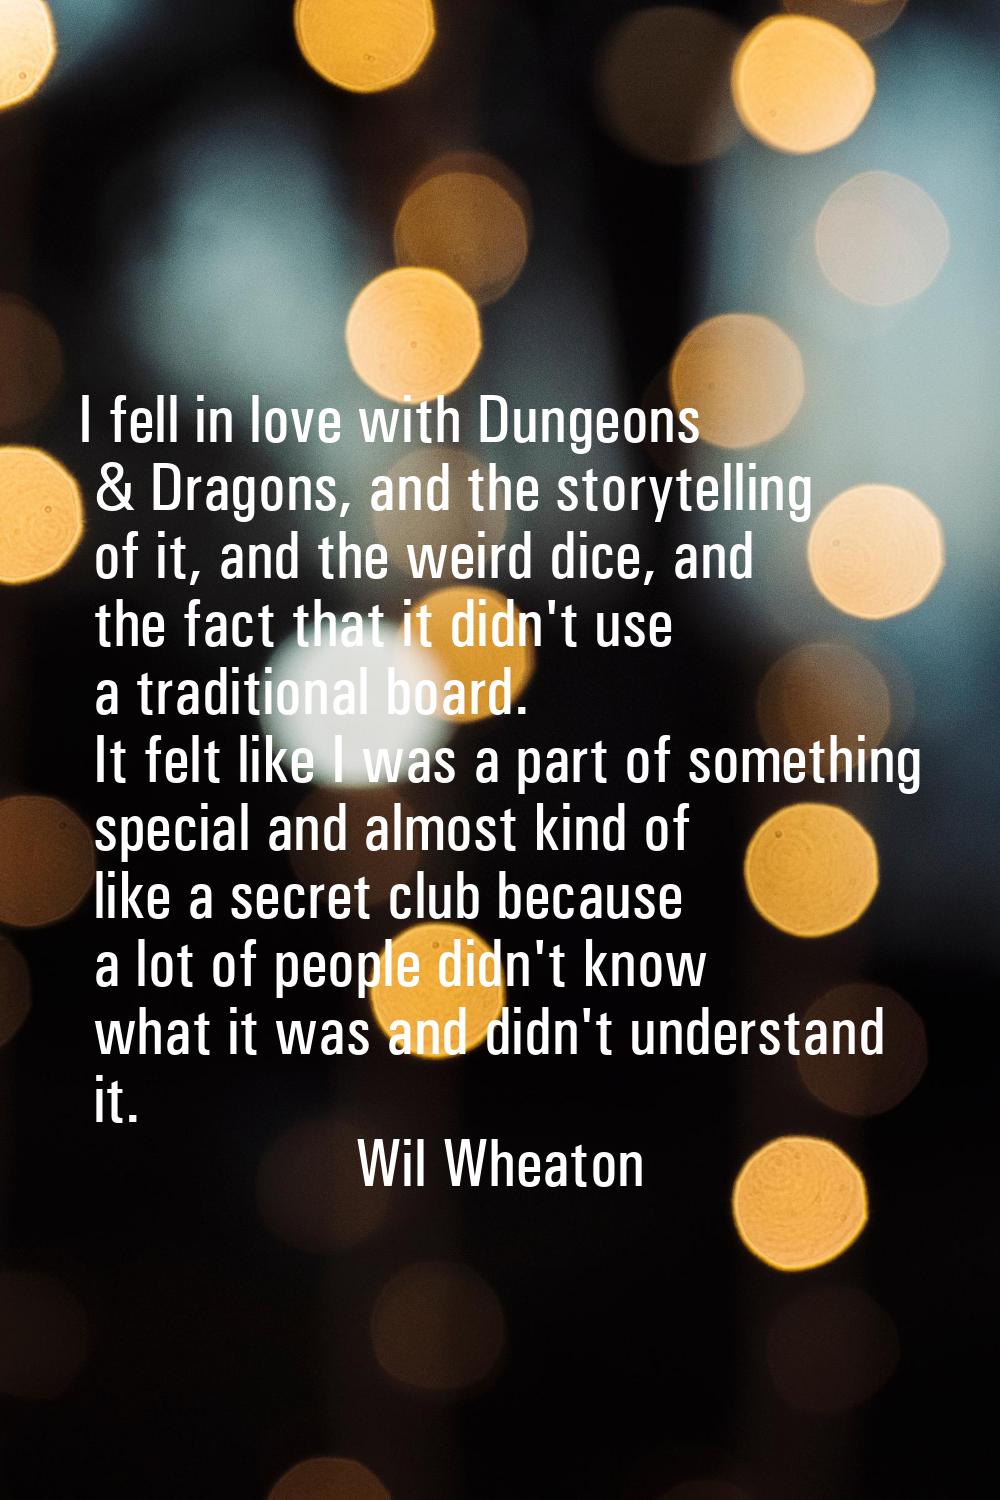 I fell in love with Dungeons & Dragons, and the storytelling of it, and the weird dice, and the fac